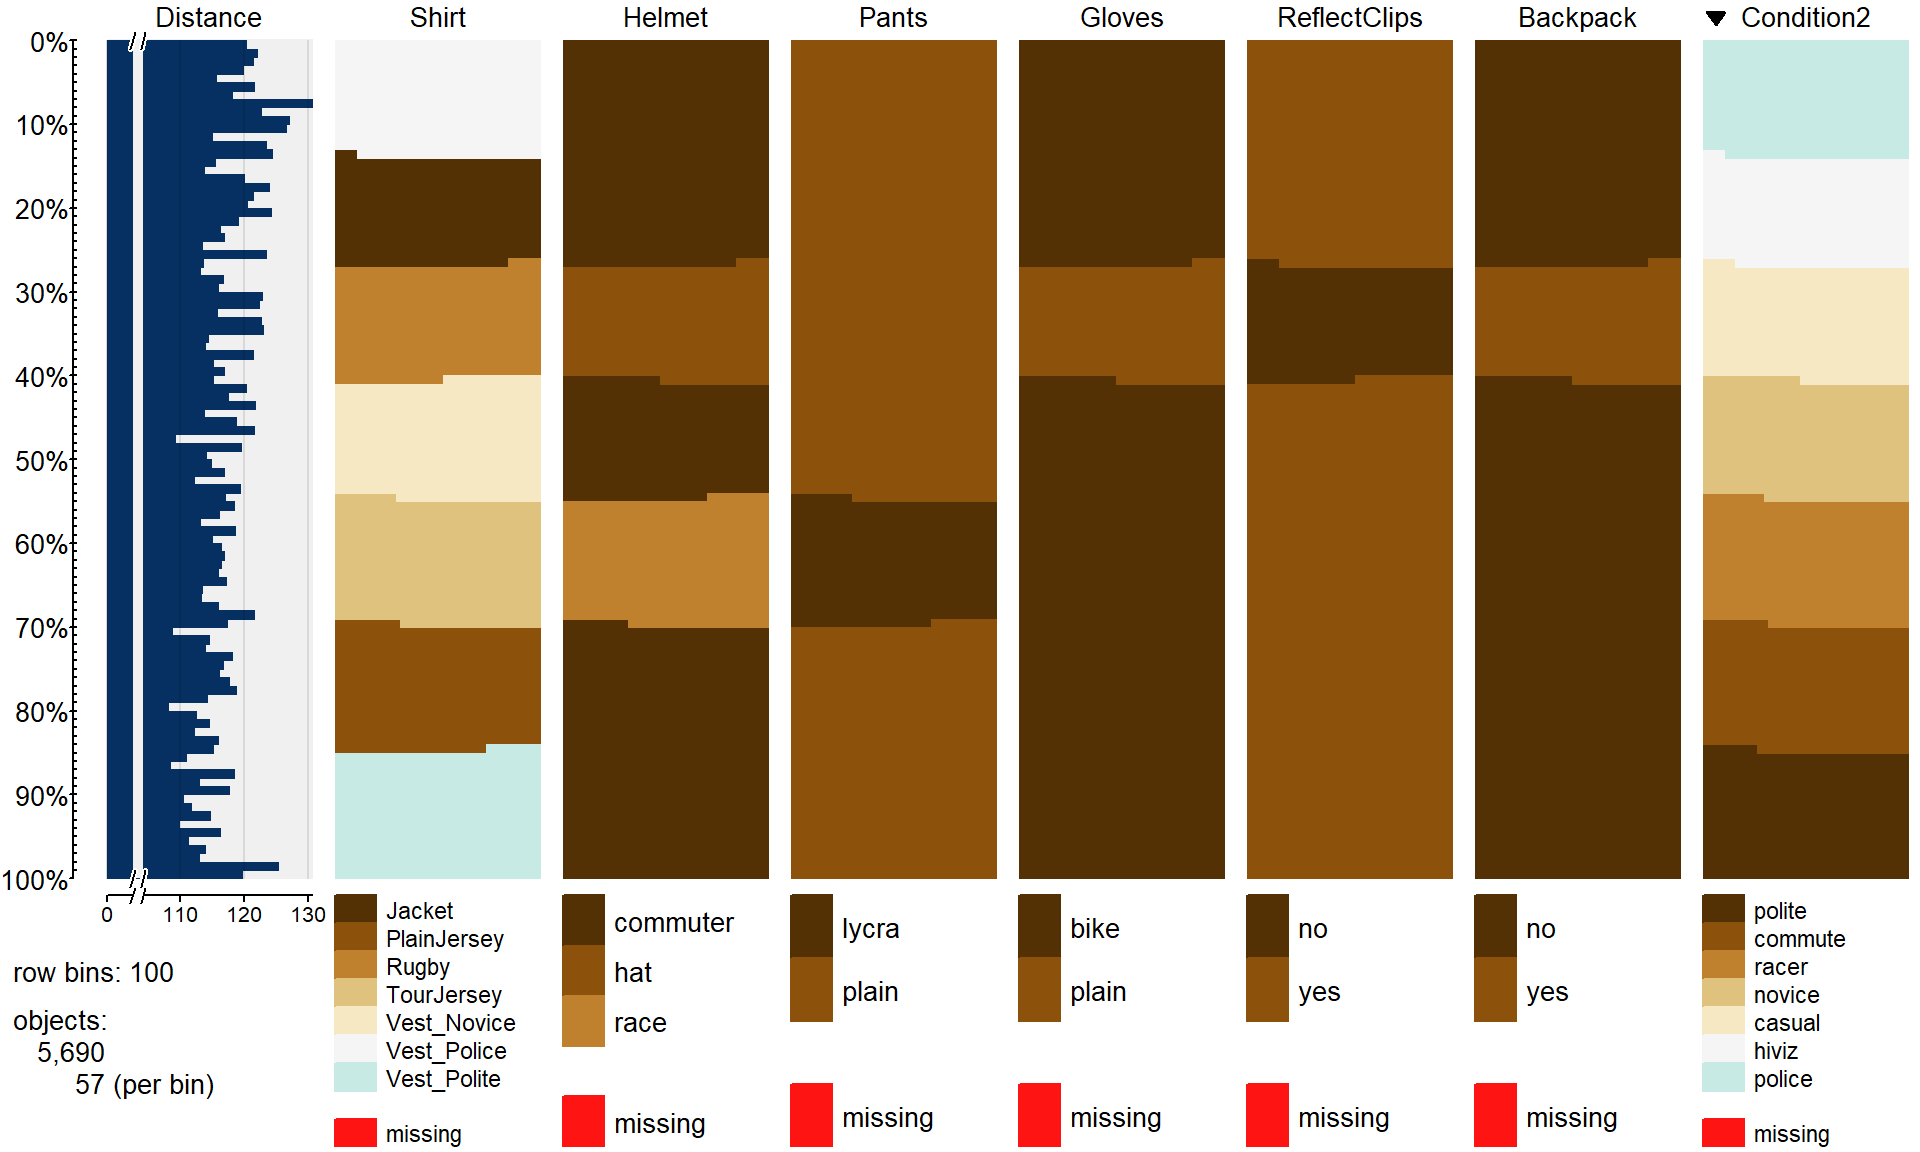 Tableplot of the full overtake data set sorted by outfit worn (Condition2).